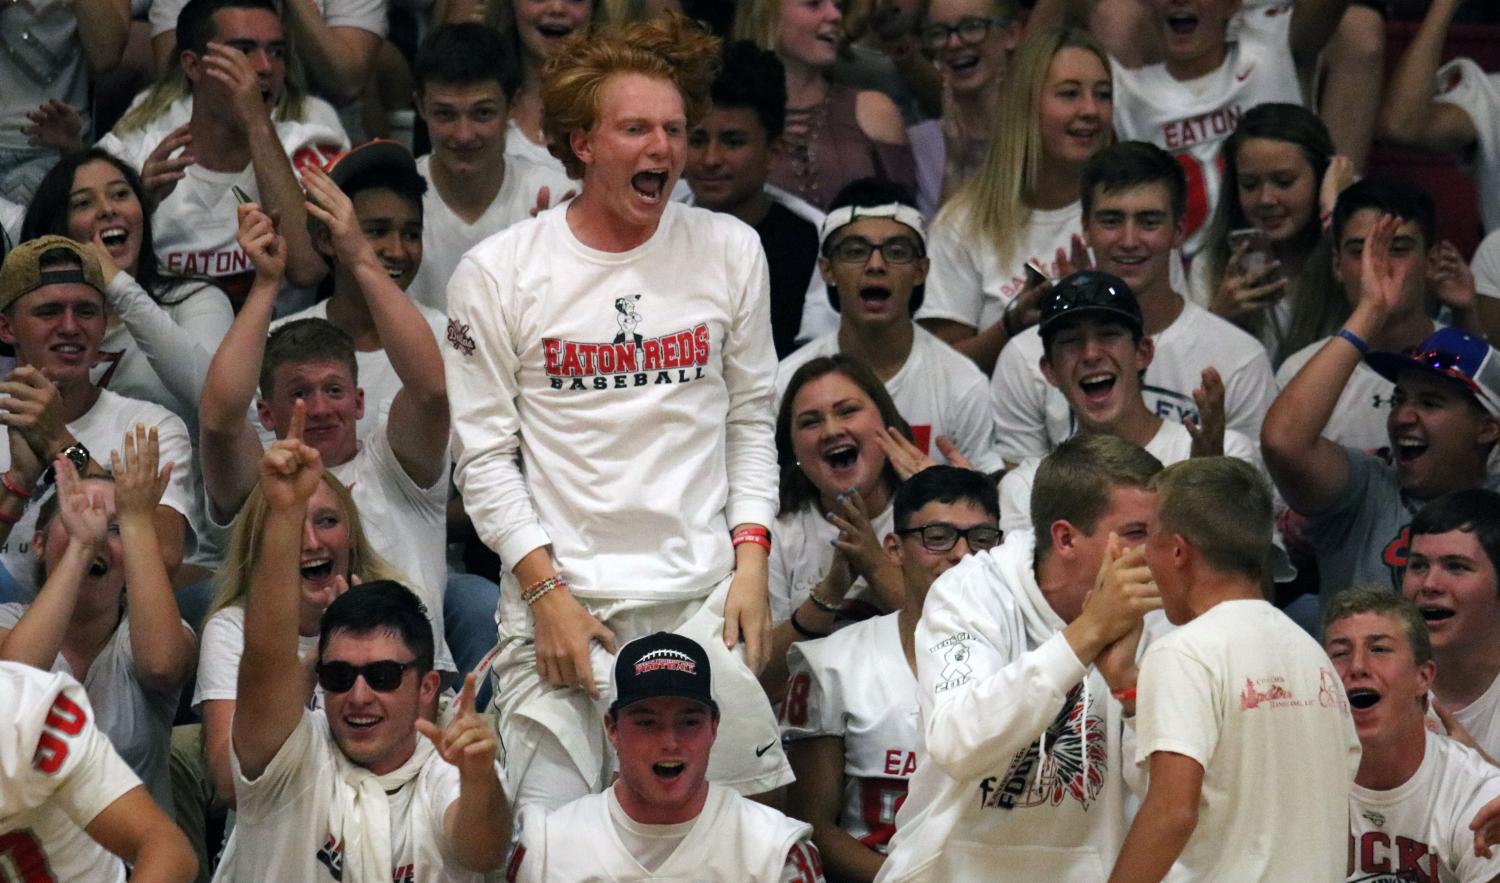 With all students dressed for a white-out, CJ Baskowski (18) jumps out of his seat to celebrate a Ma